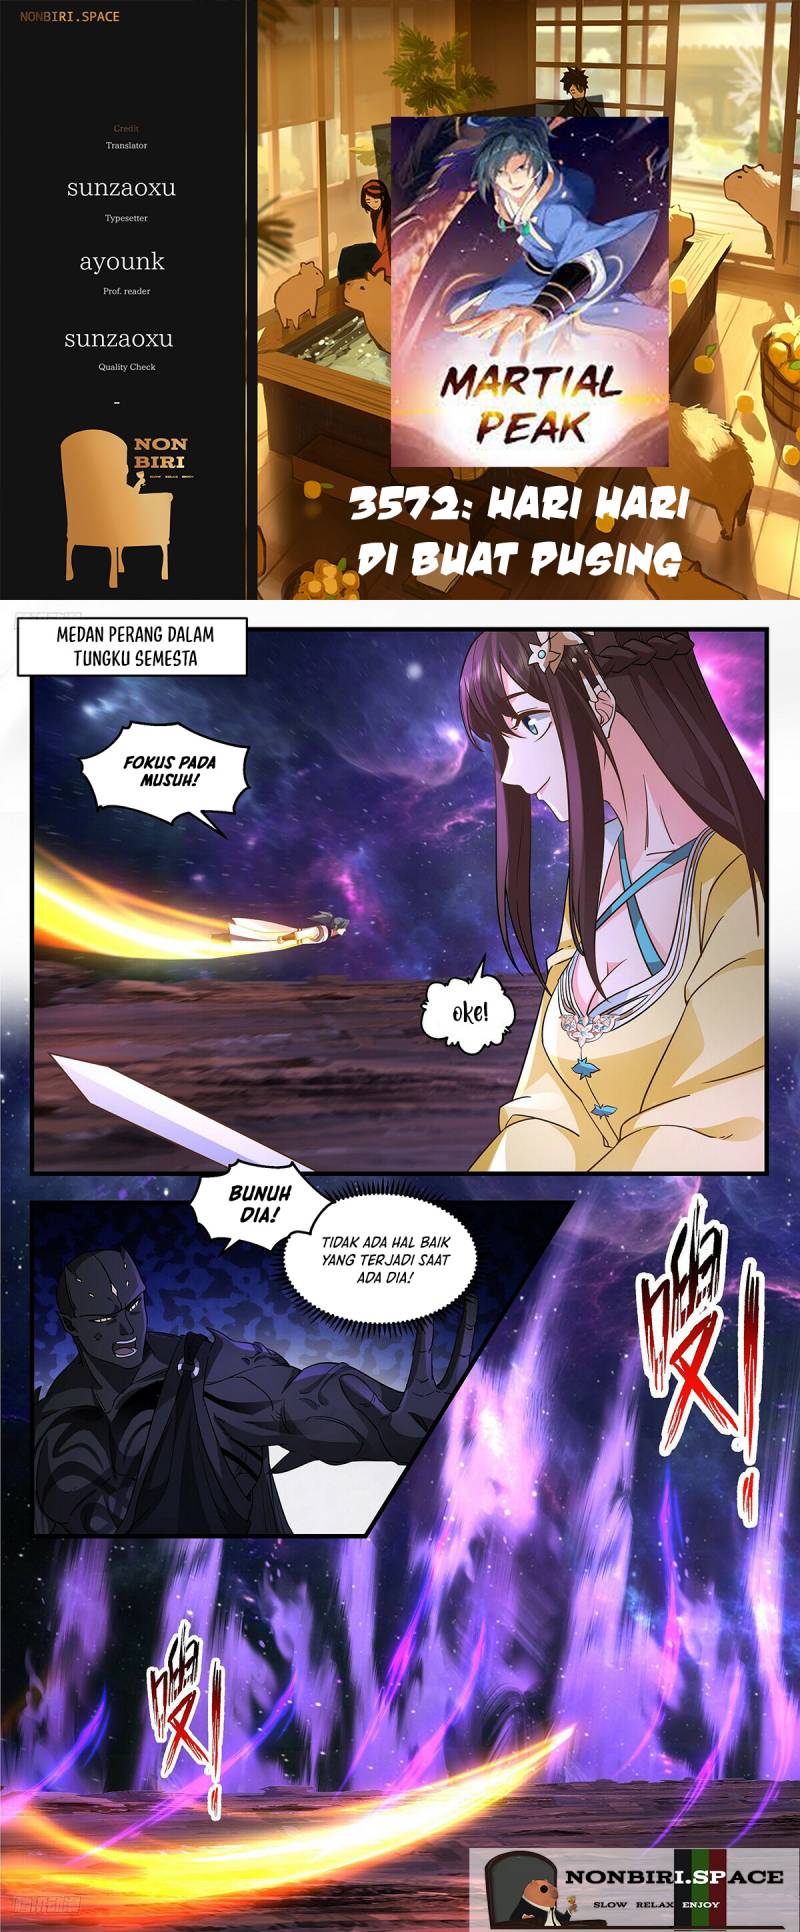 Martial Peak: Chapter 3572 - Page 1